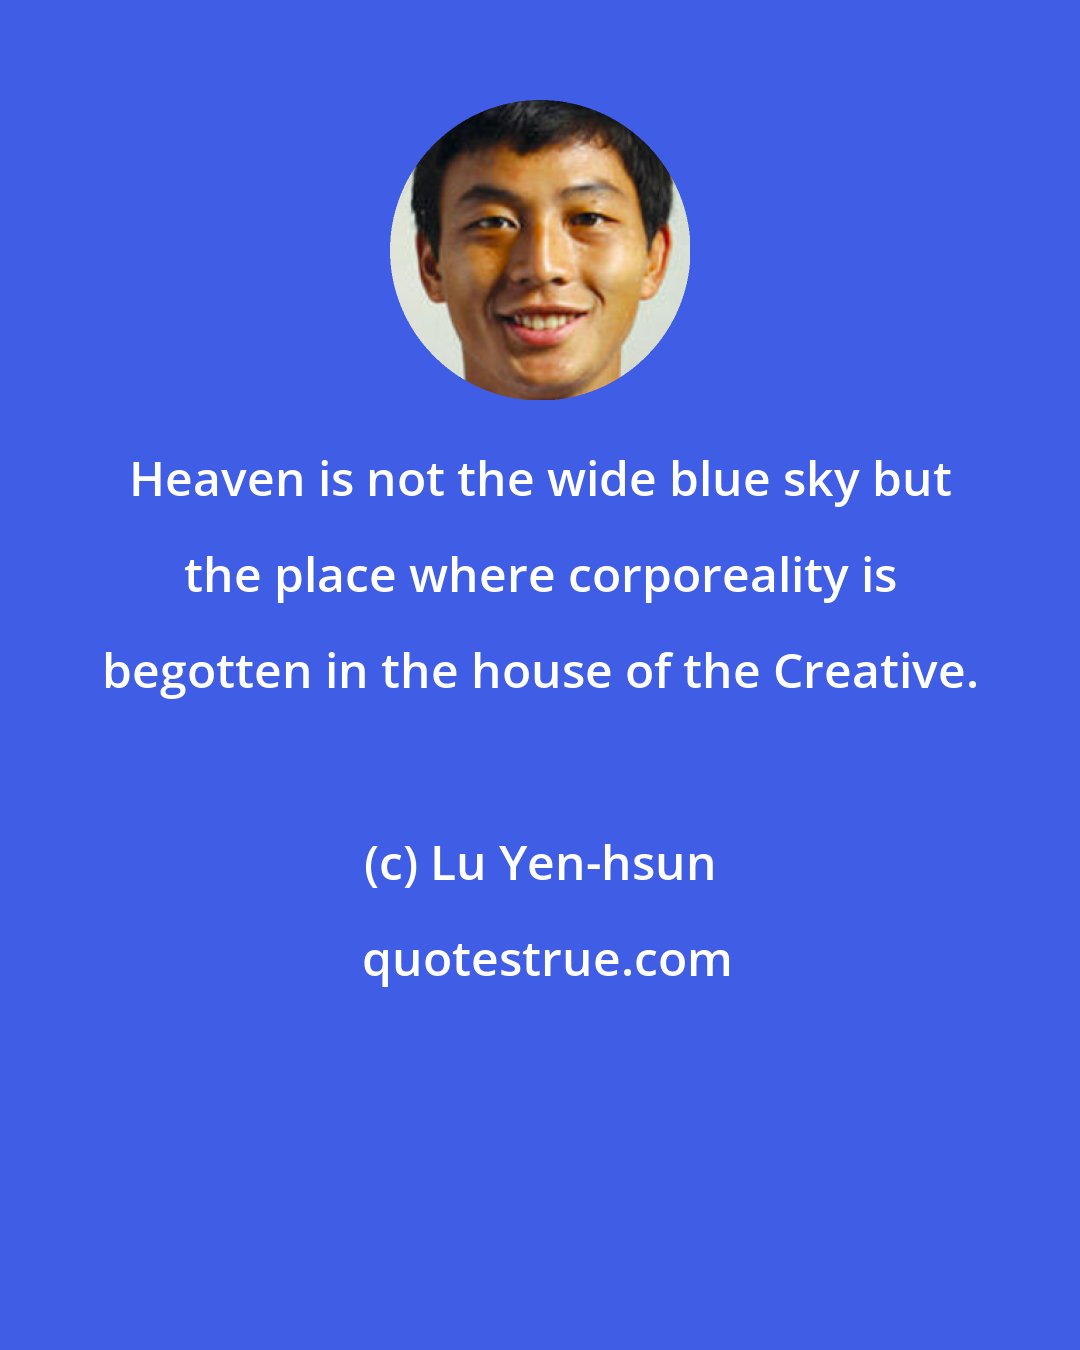 Lu Yen-hsun: Heaven is not the wide blue sky but the place where corporeality is begotten in the house of the Creative.